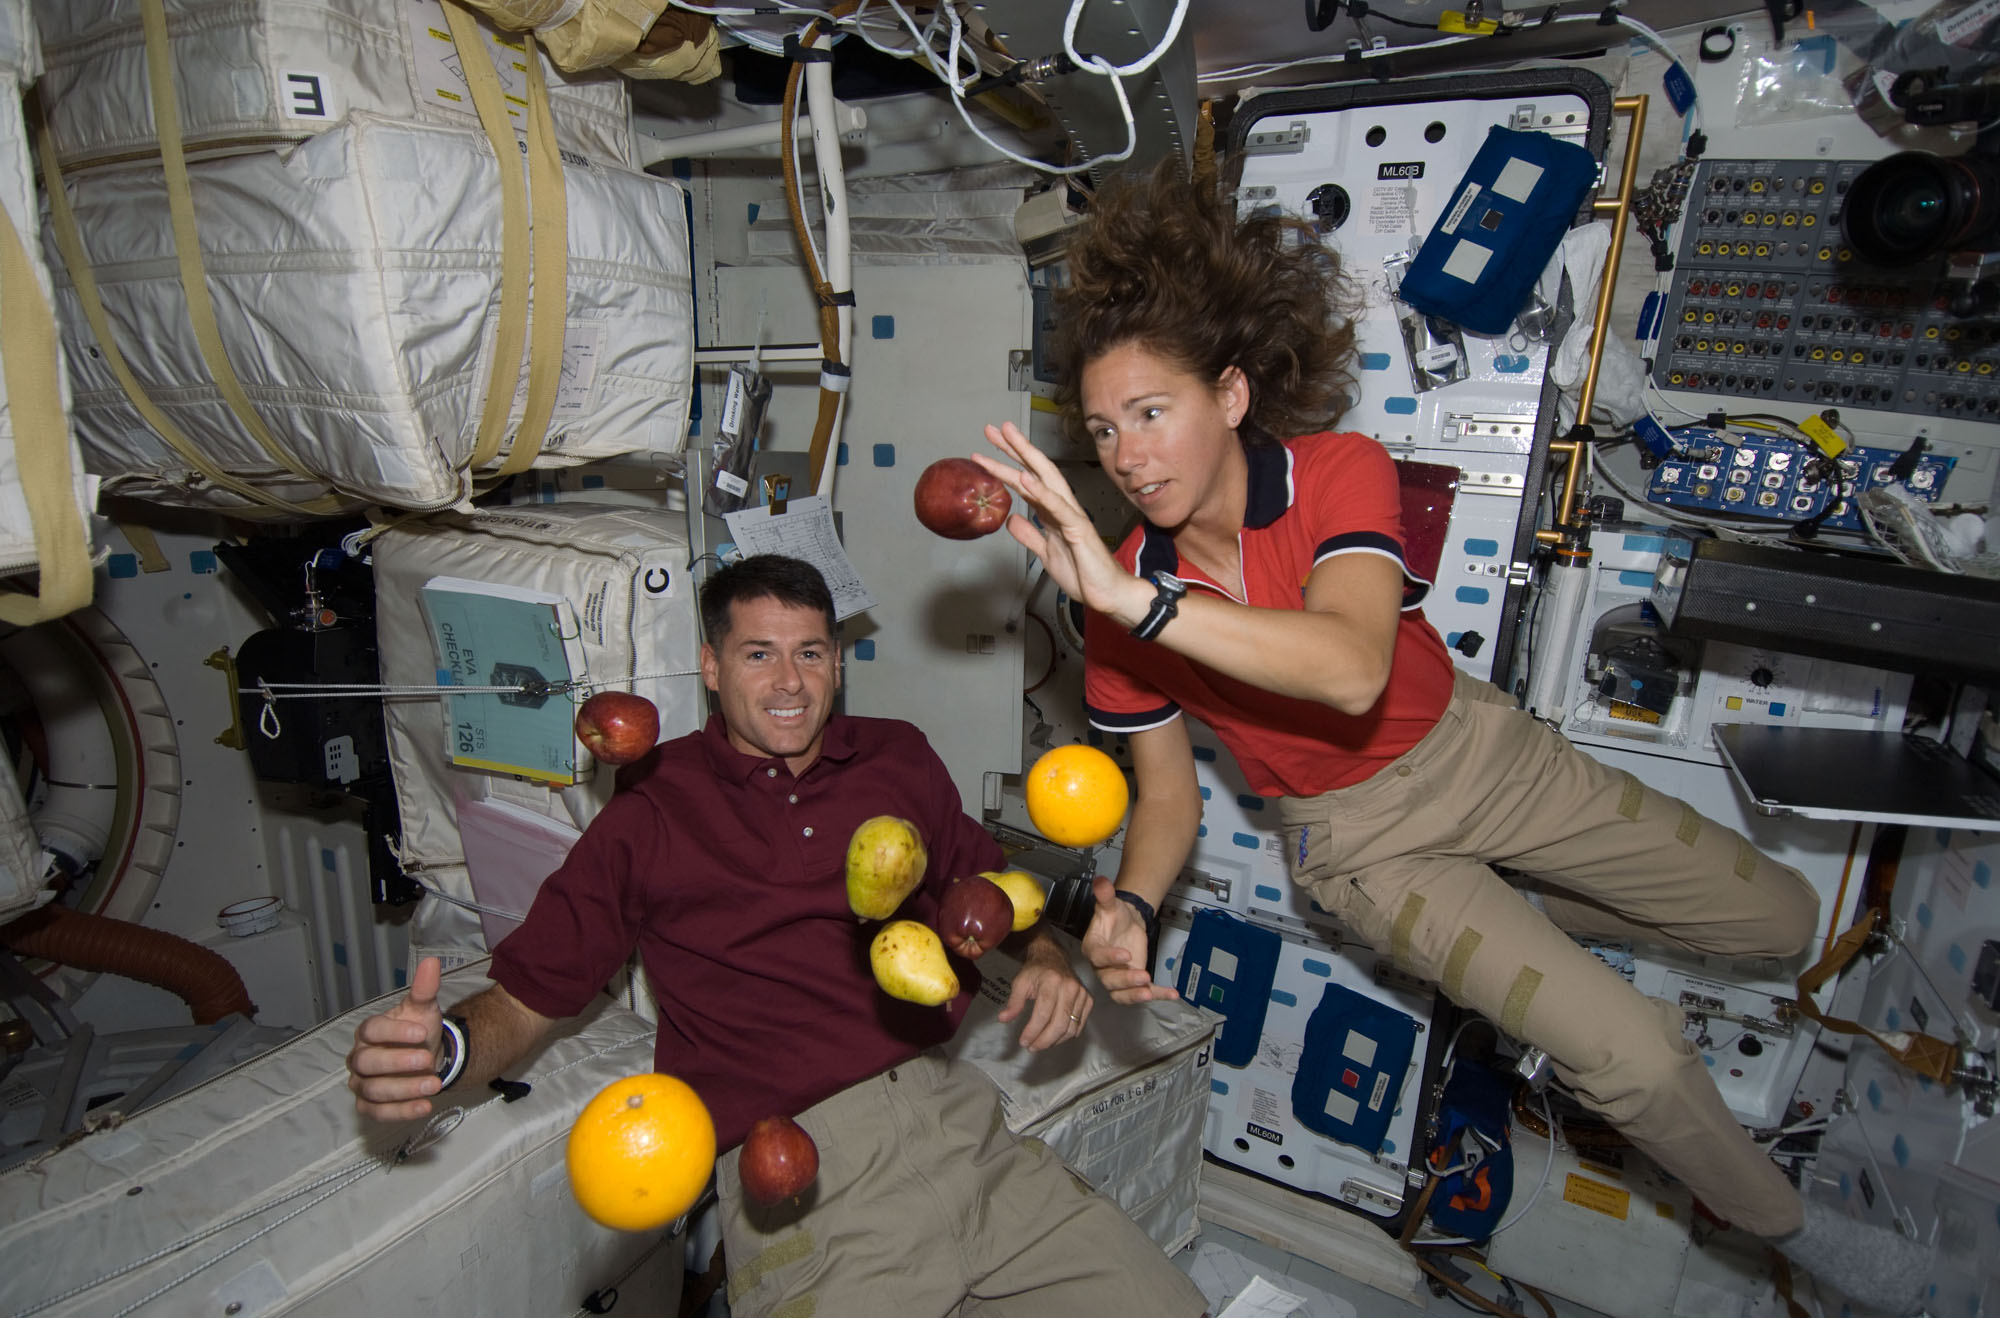 Zero Gravity Day on Sunday: This Hoax Holds No Weight